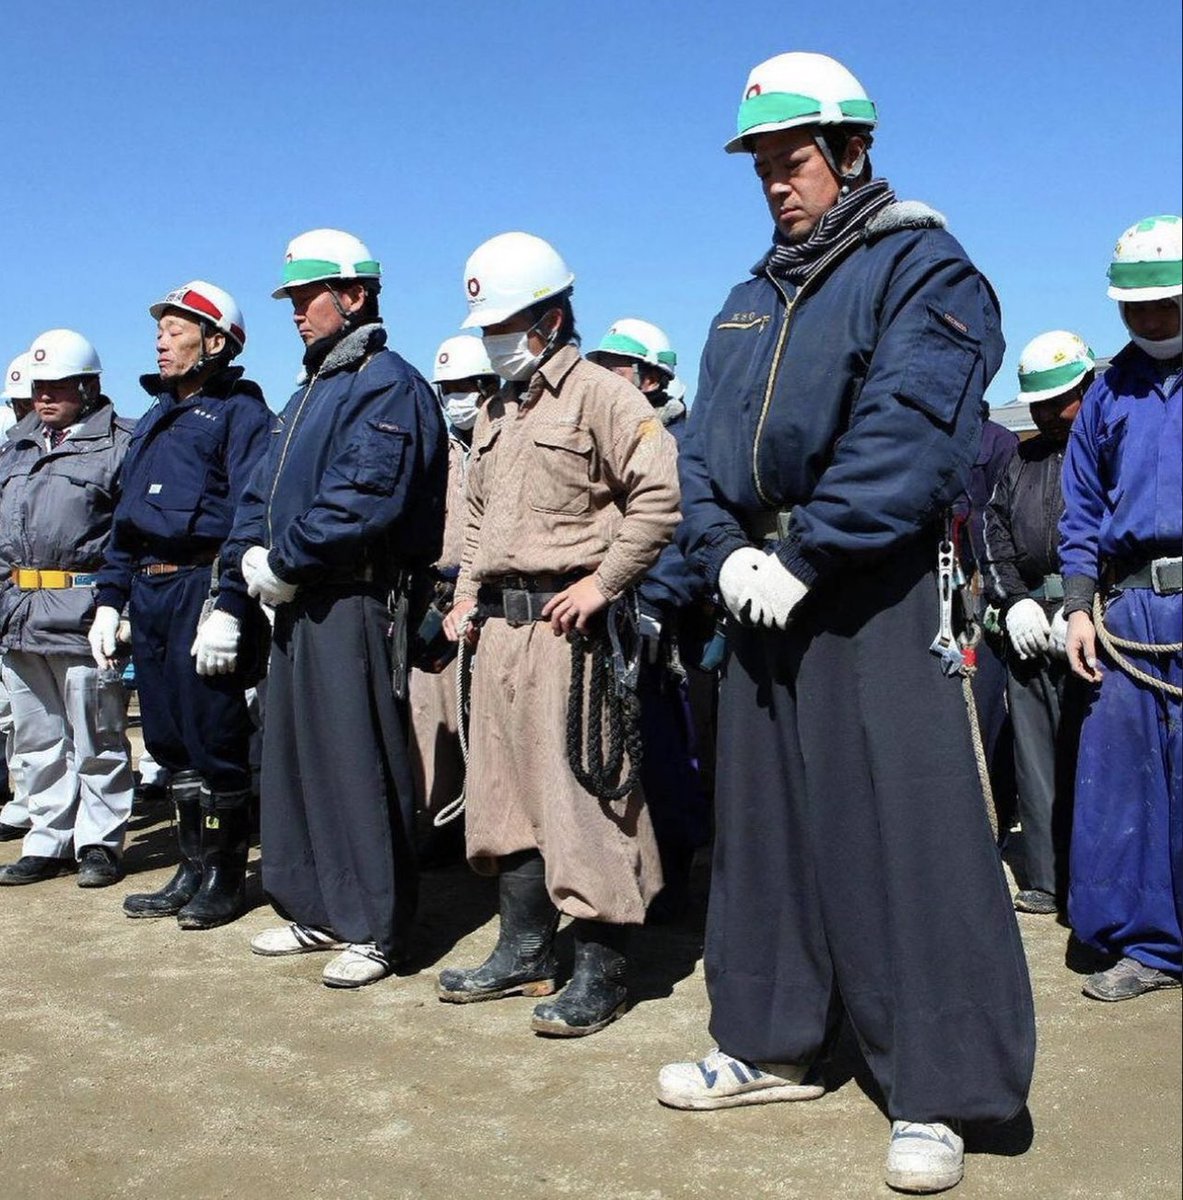 “Tobi” Pants worn by Japanese Construction Workers!🖤